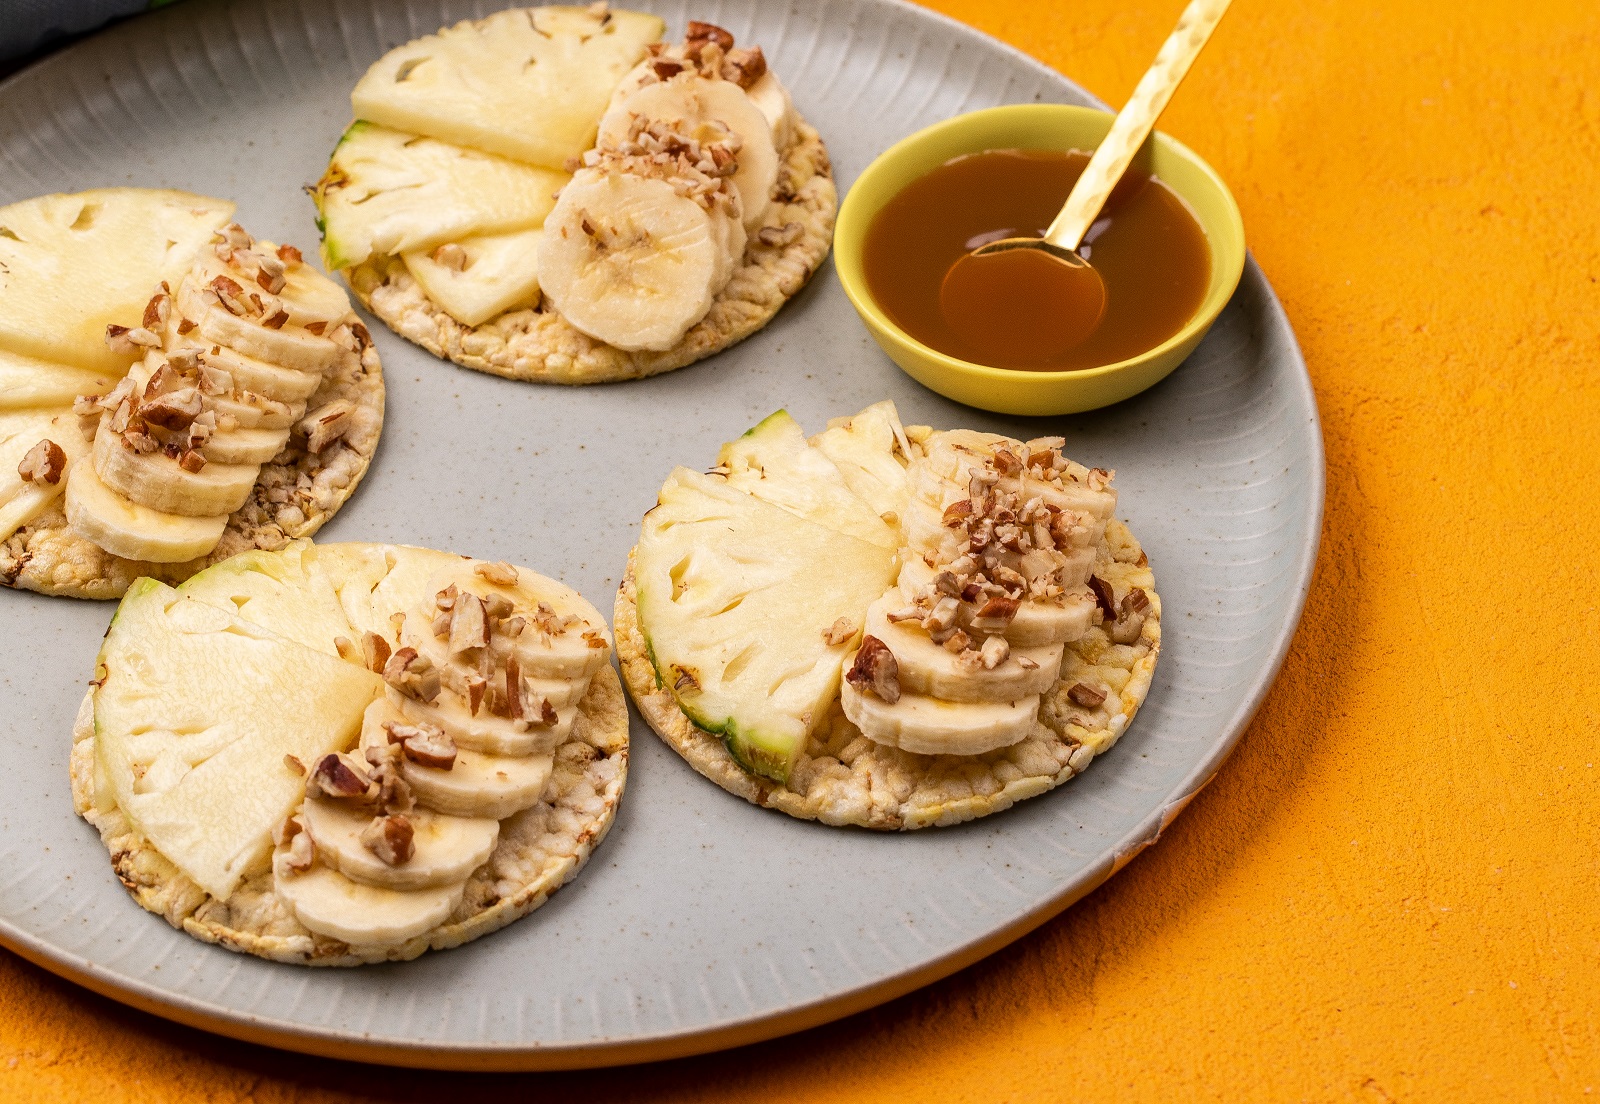 Pineapple, Banana & Pecans with a Caramel Drizzle on CORN THINS slices fro breakfast or a snack (vegetarian)